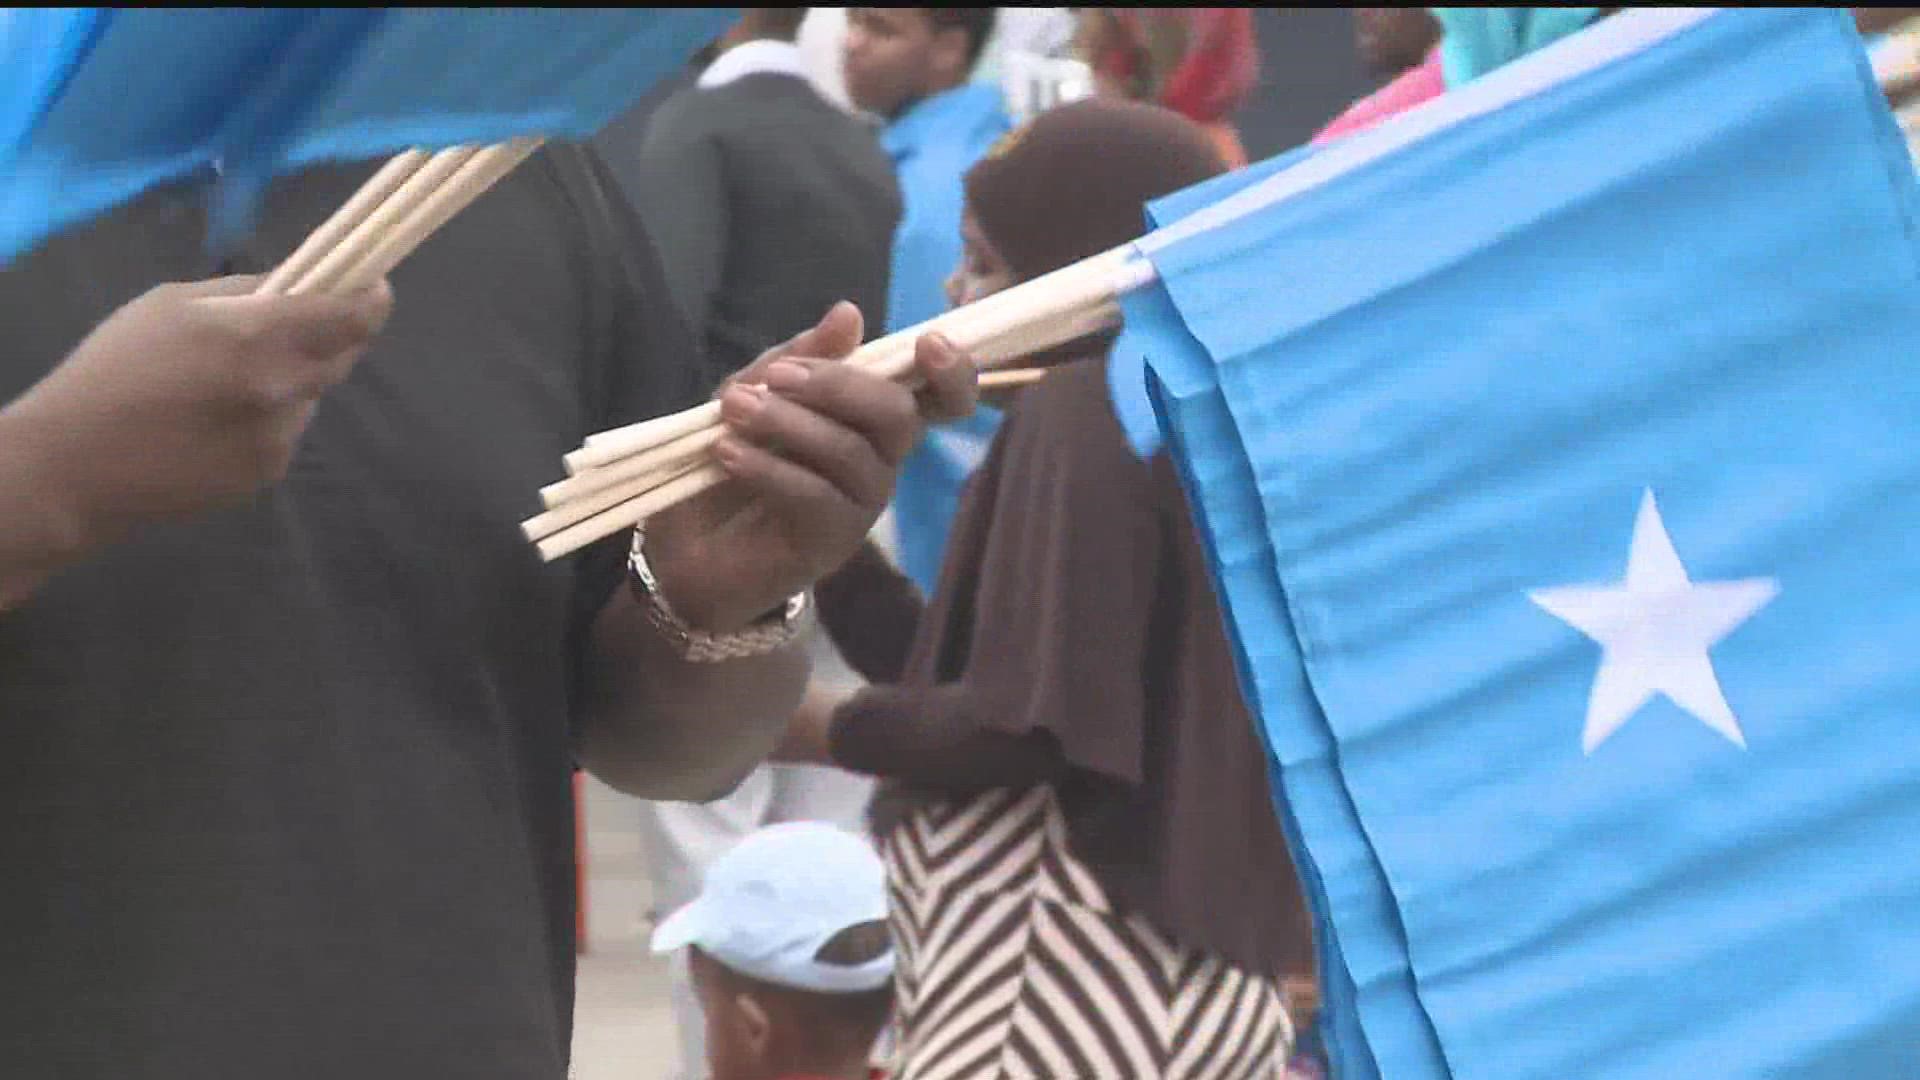 Minnesota’s Somali Week returns this weekend, following a two-year hiatus caused by the COVID-19 pandemic.